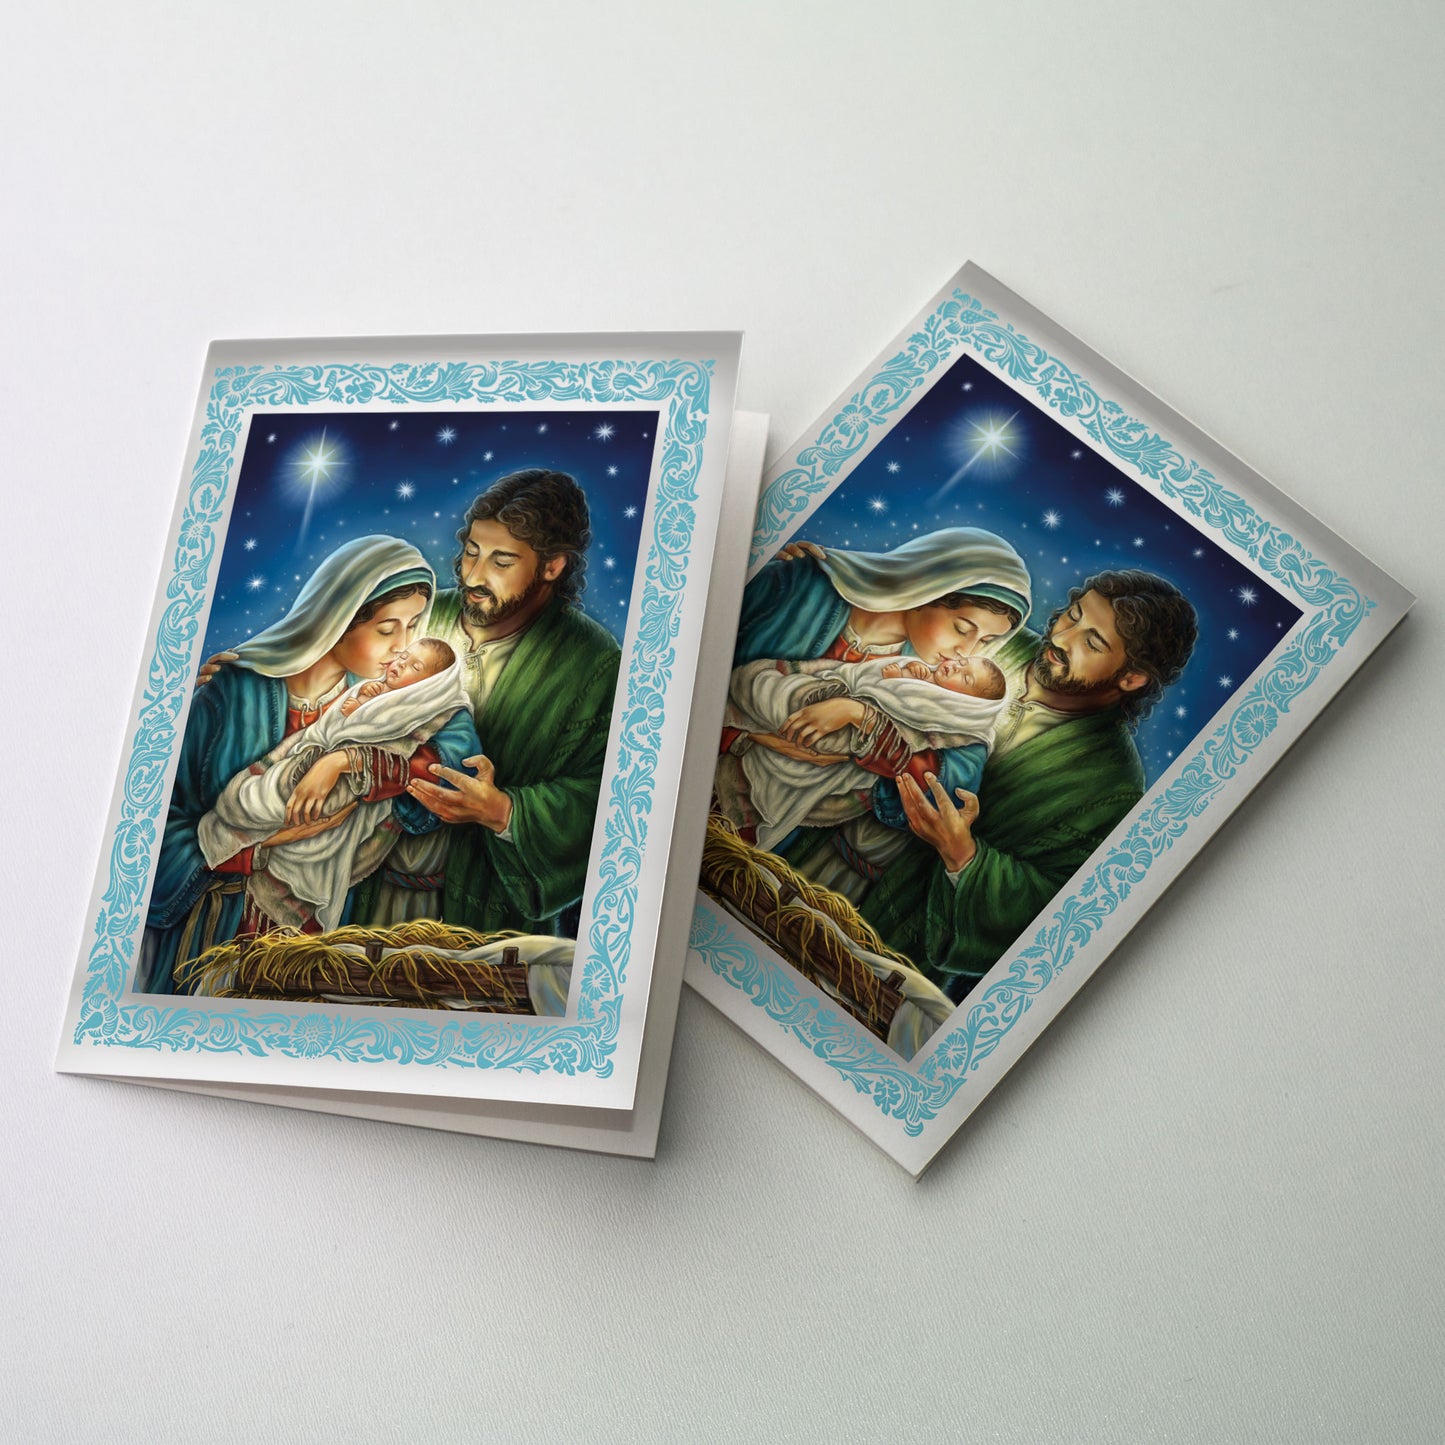 The Love That Was Shown - Christmas Cards